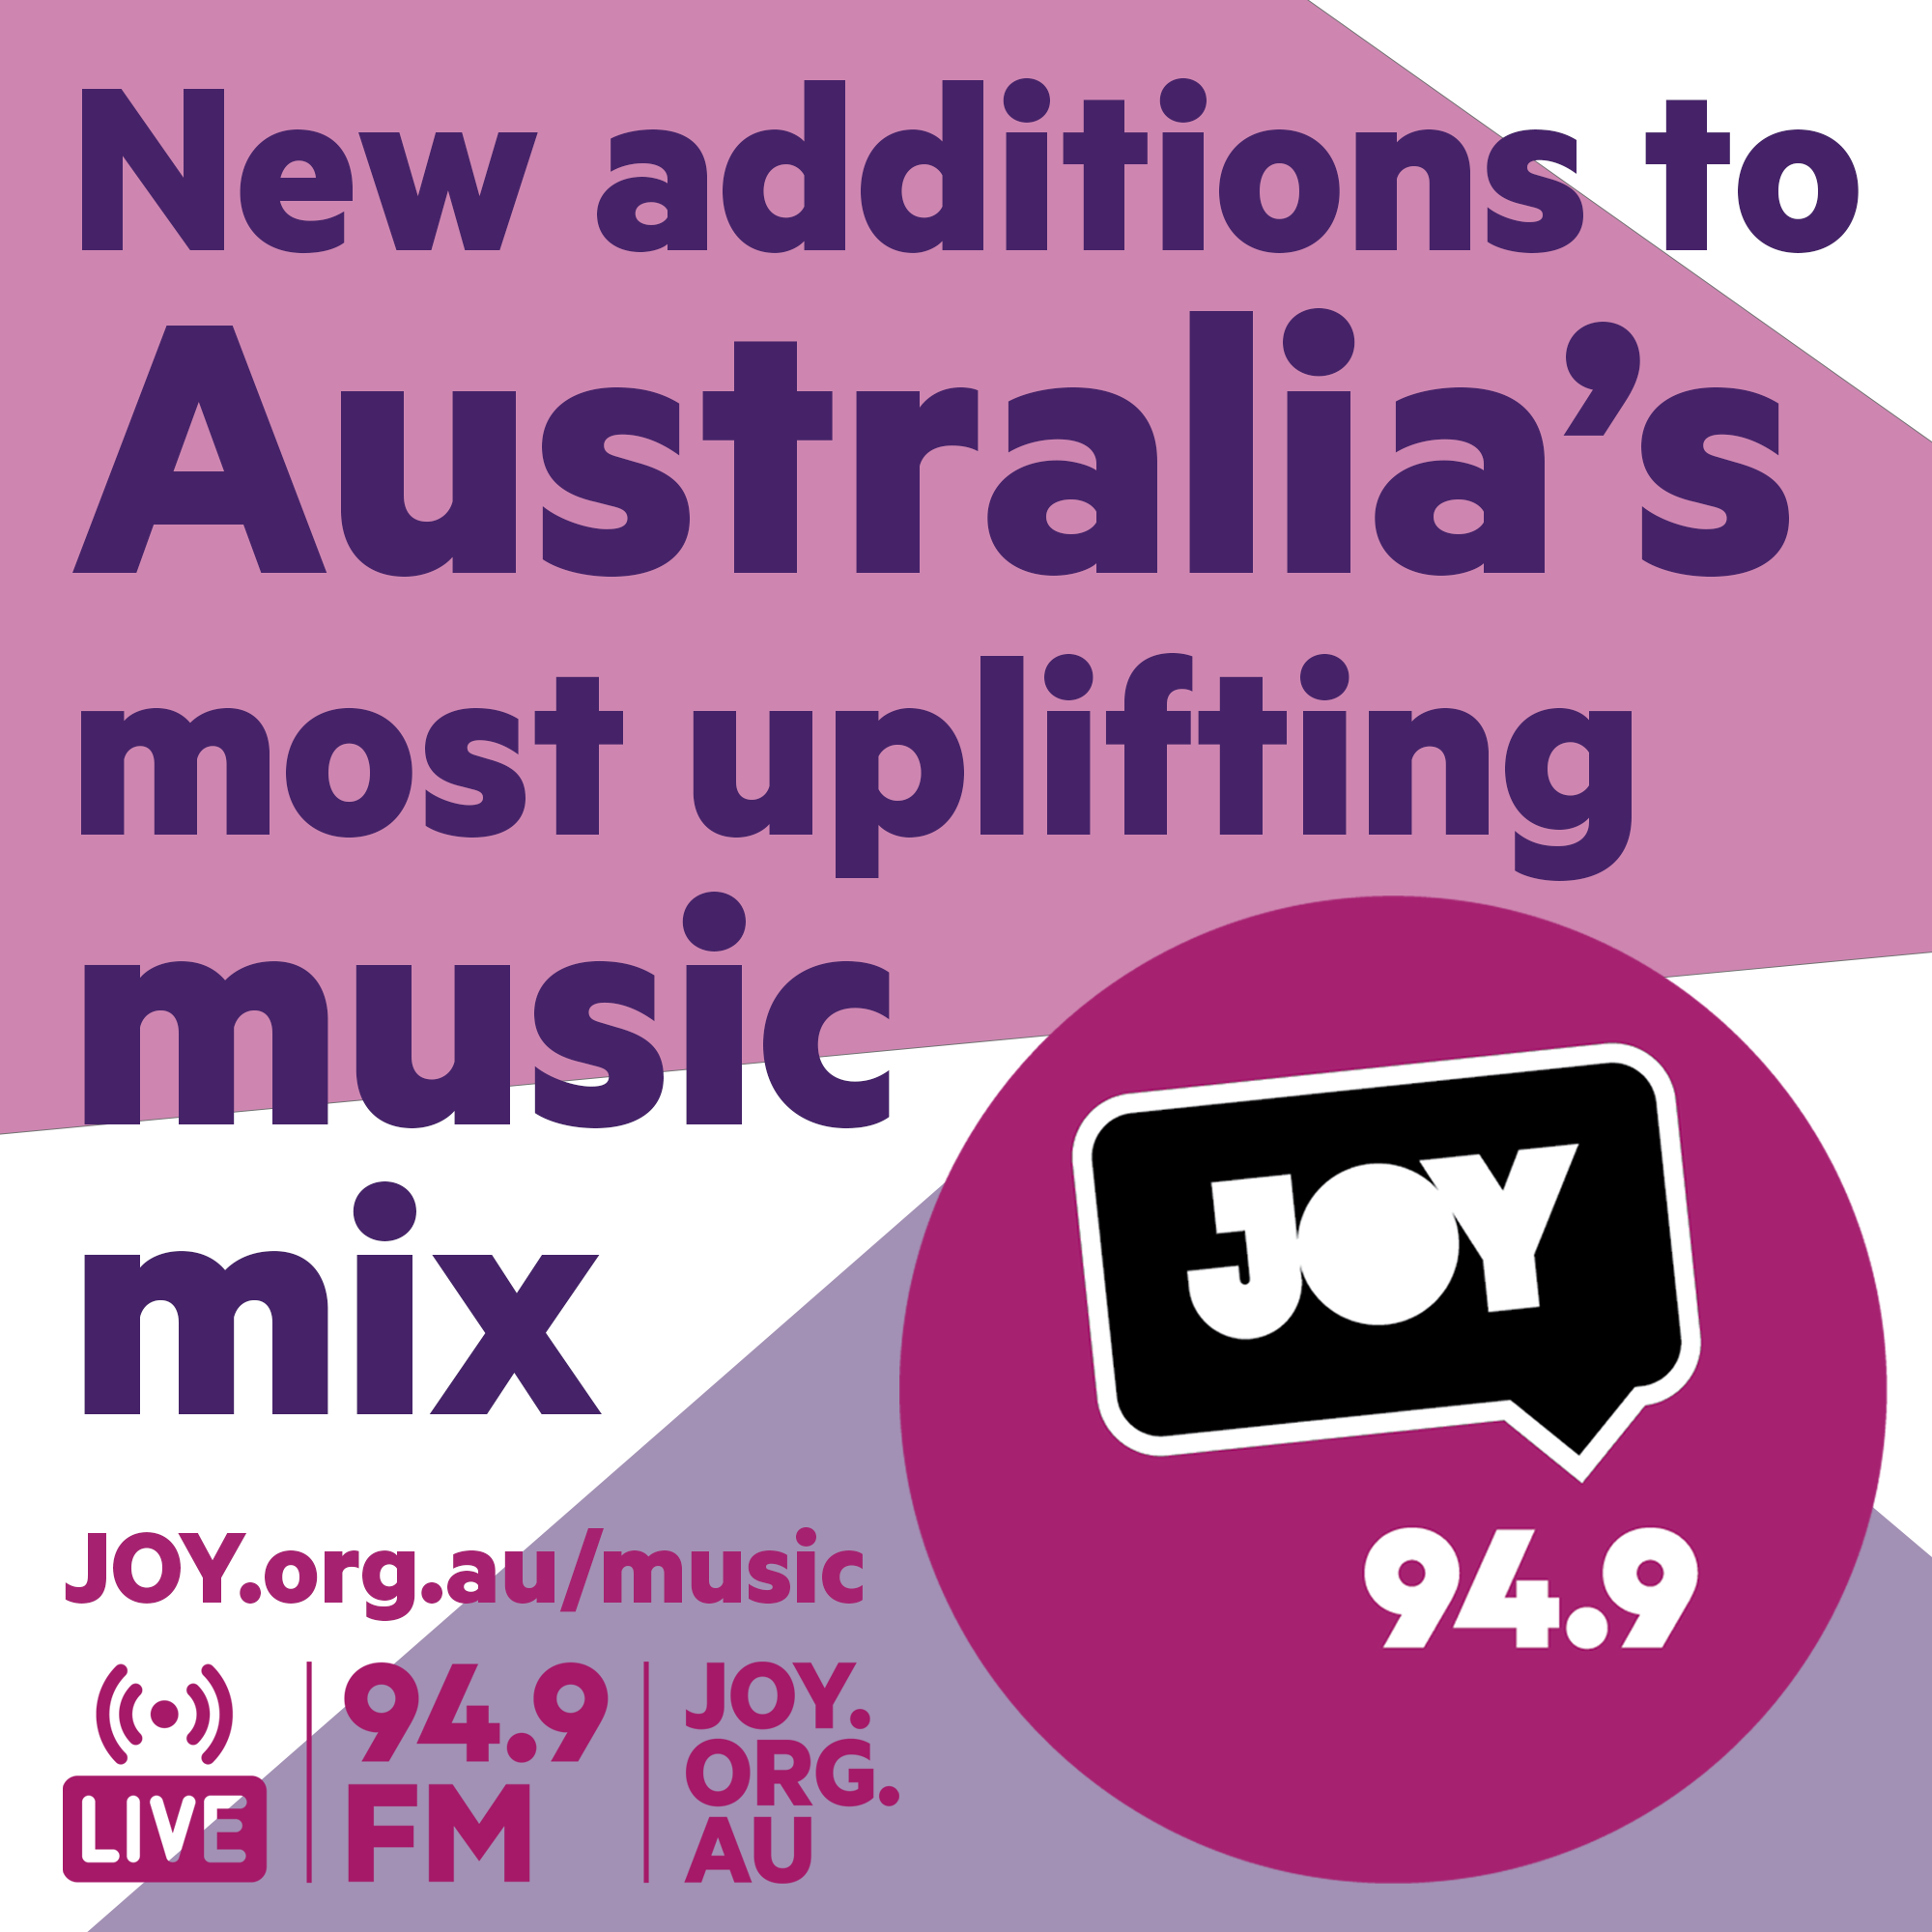 The newest songs to Australia’s most uplifting music mix: 18 May 2022